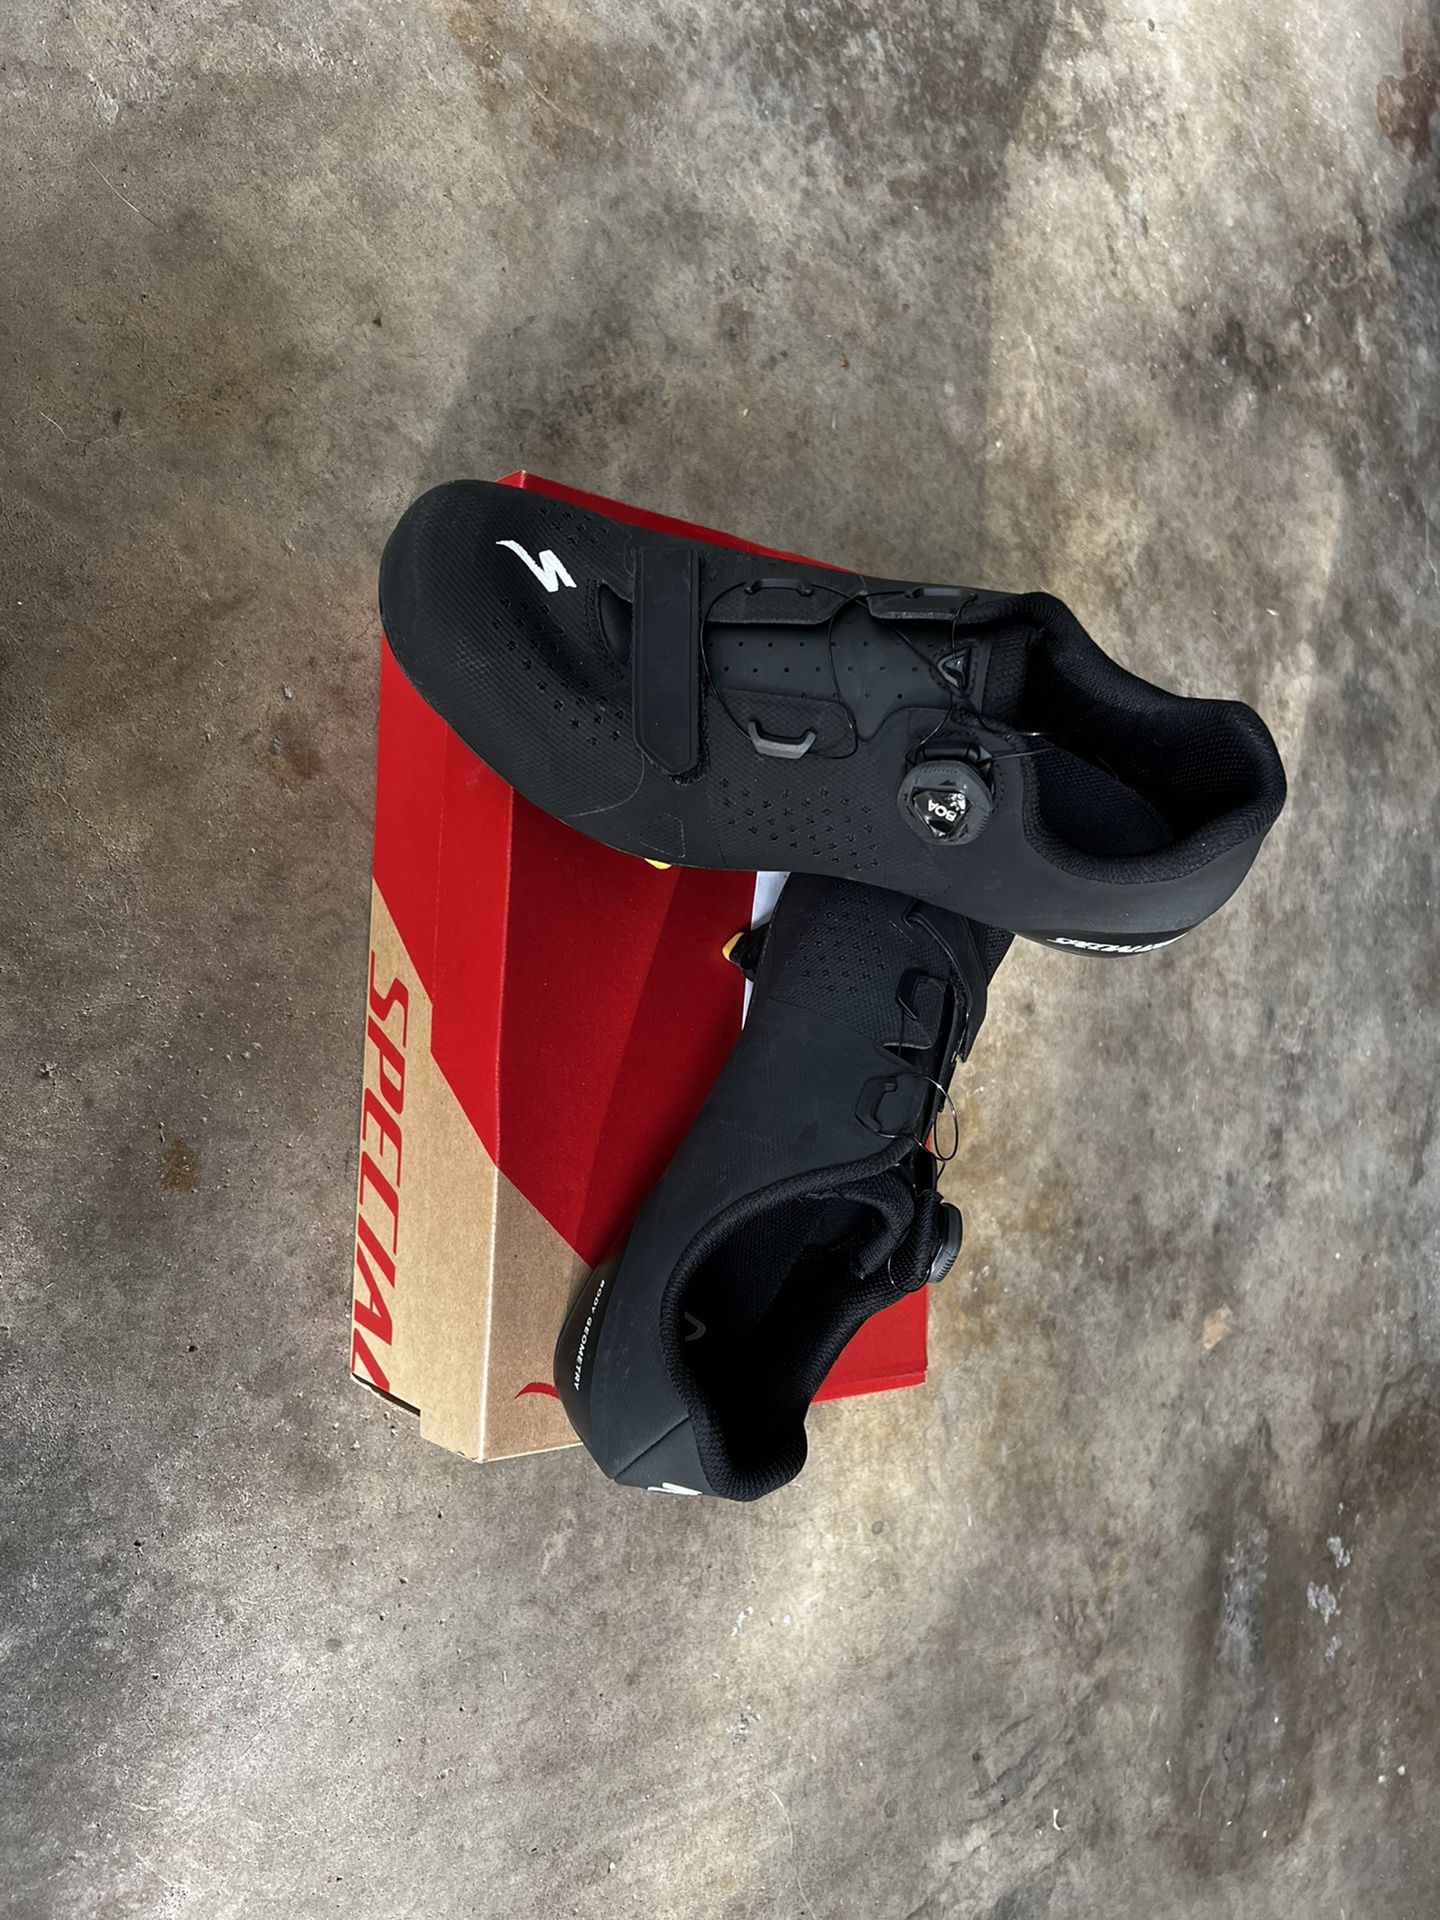 Specialized Shoes With Cleats 